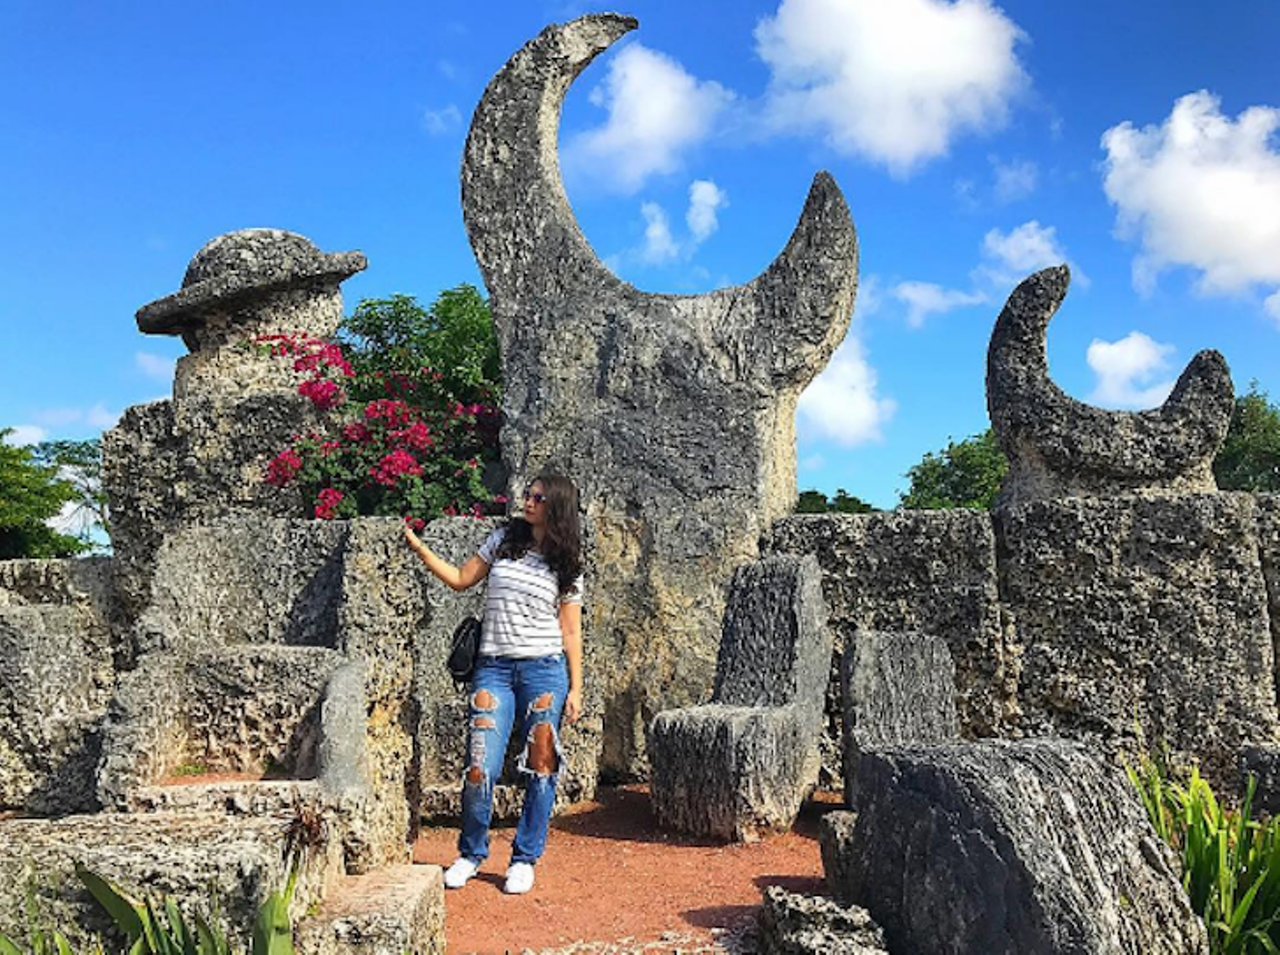 Coral Castle
28655 S. Dixie Highway, Homestead | 305-248-6345
After his beloved Agnes left him a day before their wedding, early 1900s sculptor Ed Leedskalnin took 30 years to handcut gigantic pieces of stone into the works of art that you see today at Coral Castle. The whimsical shapes and designs made from rigid stone are perplexing to say the least.
Photo via sabrinahelisa/Instagram